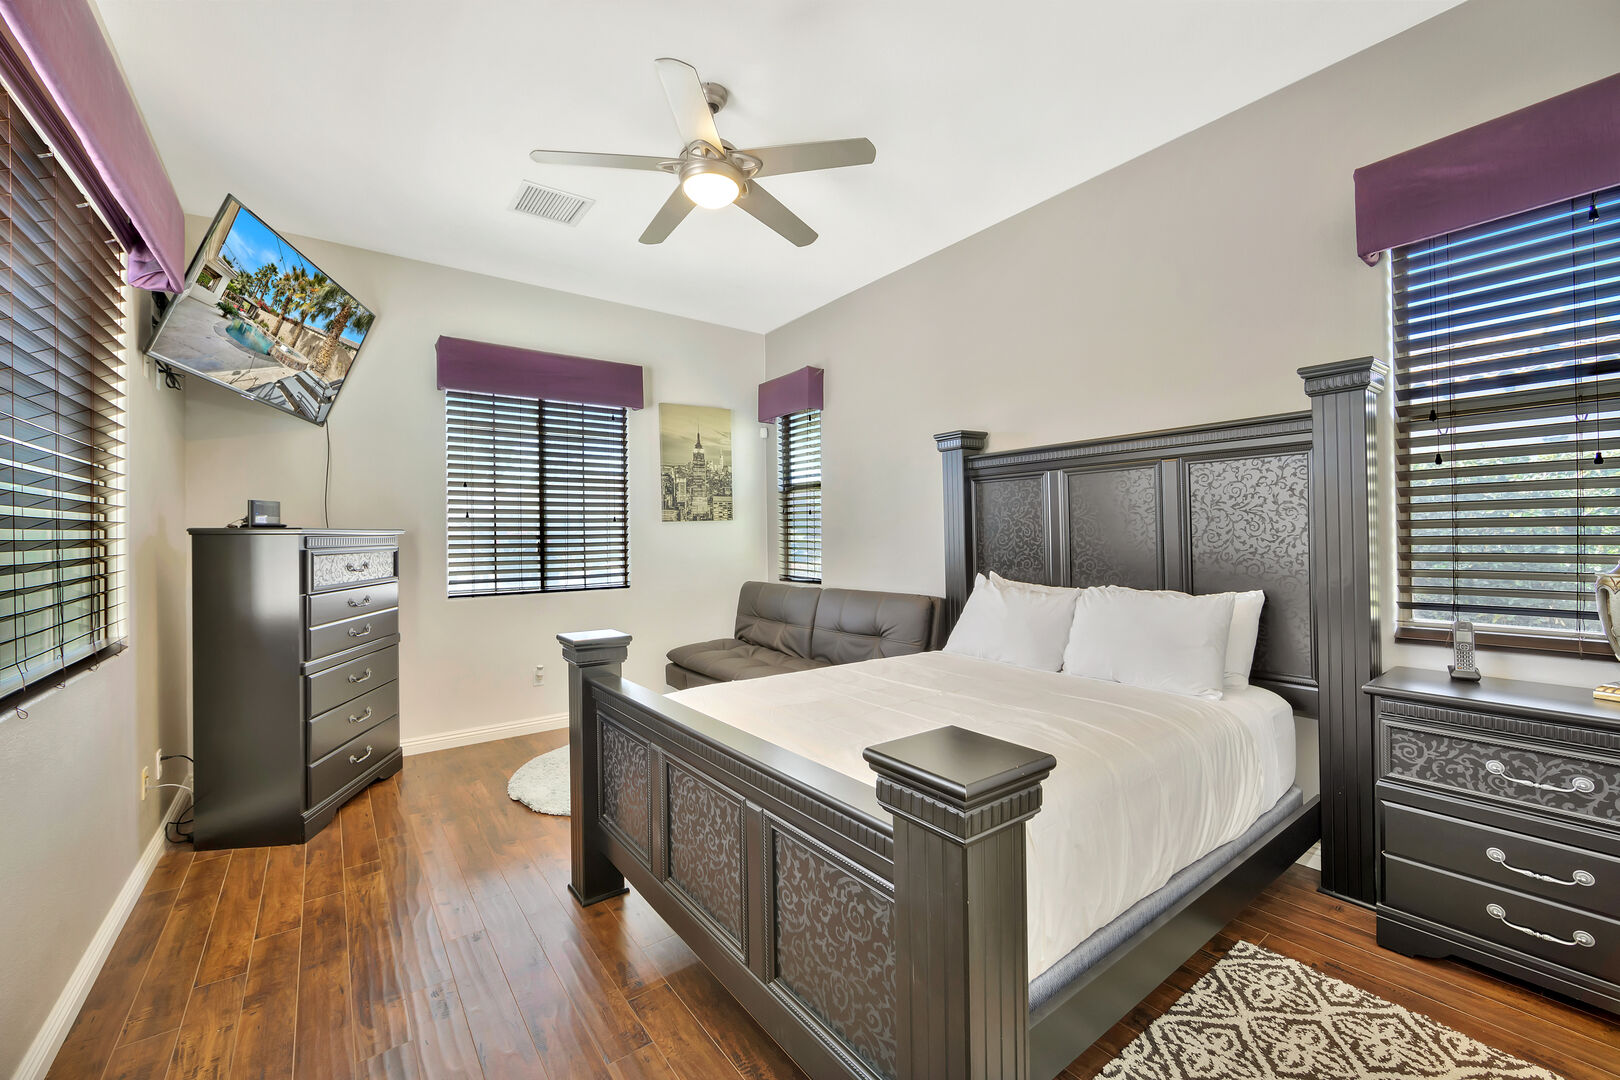 Relax and catch a break from all the fun in Suite 2. It features a Full-sized bed, Twin-sized Futon Bed, 55-inch TCL Smart Television, and reach-in closet.